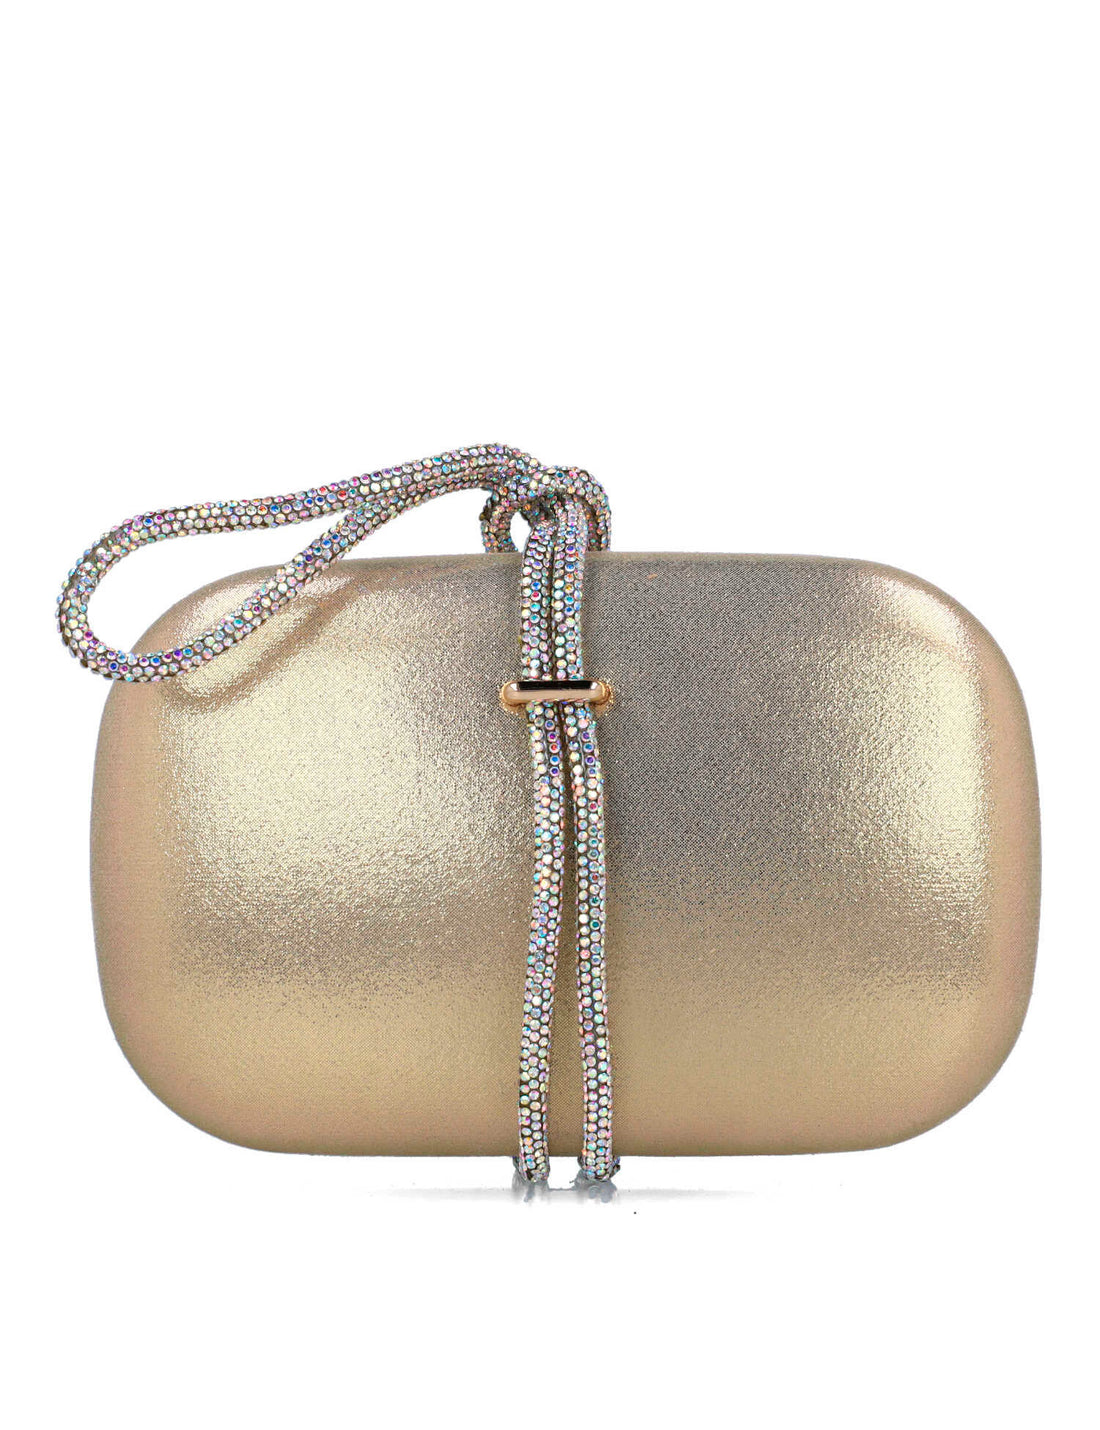 Gold Clutch With Embellished Hand Strap_85499_00_01